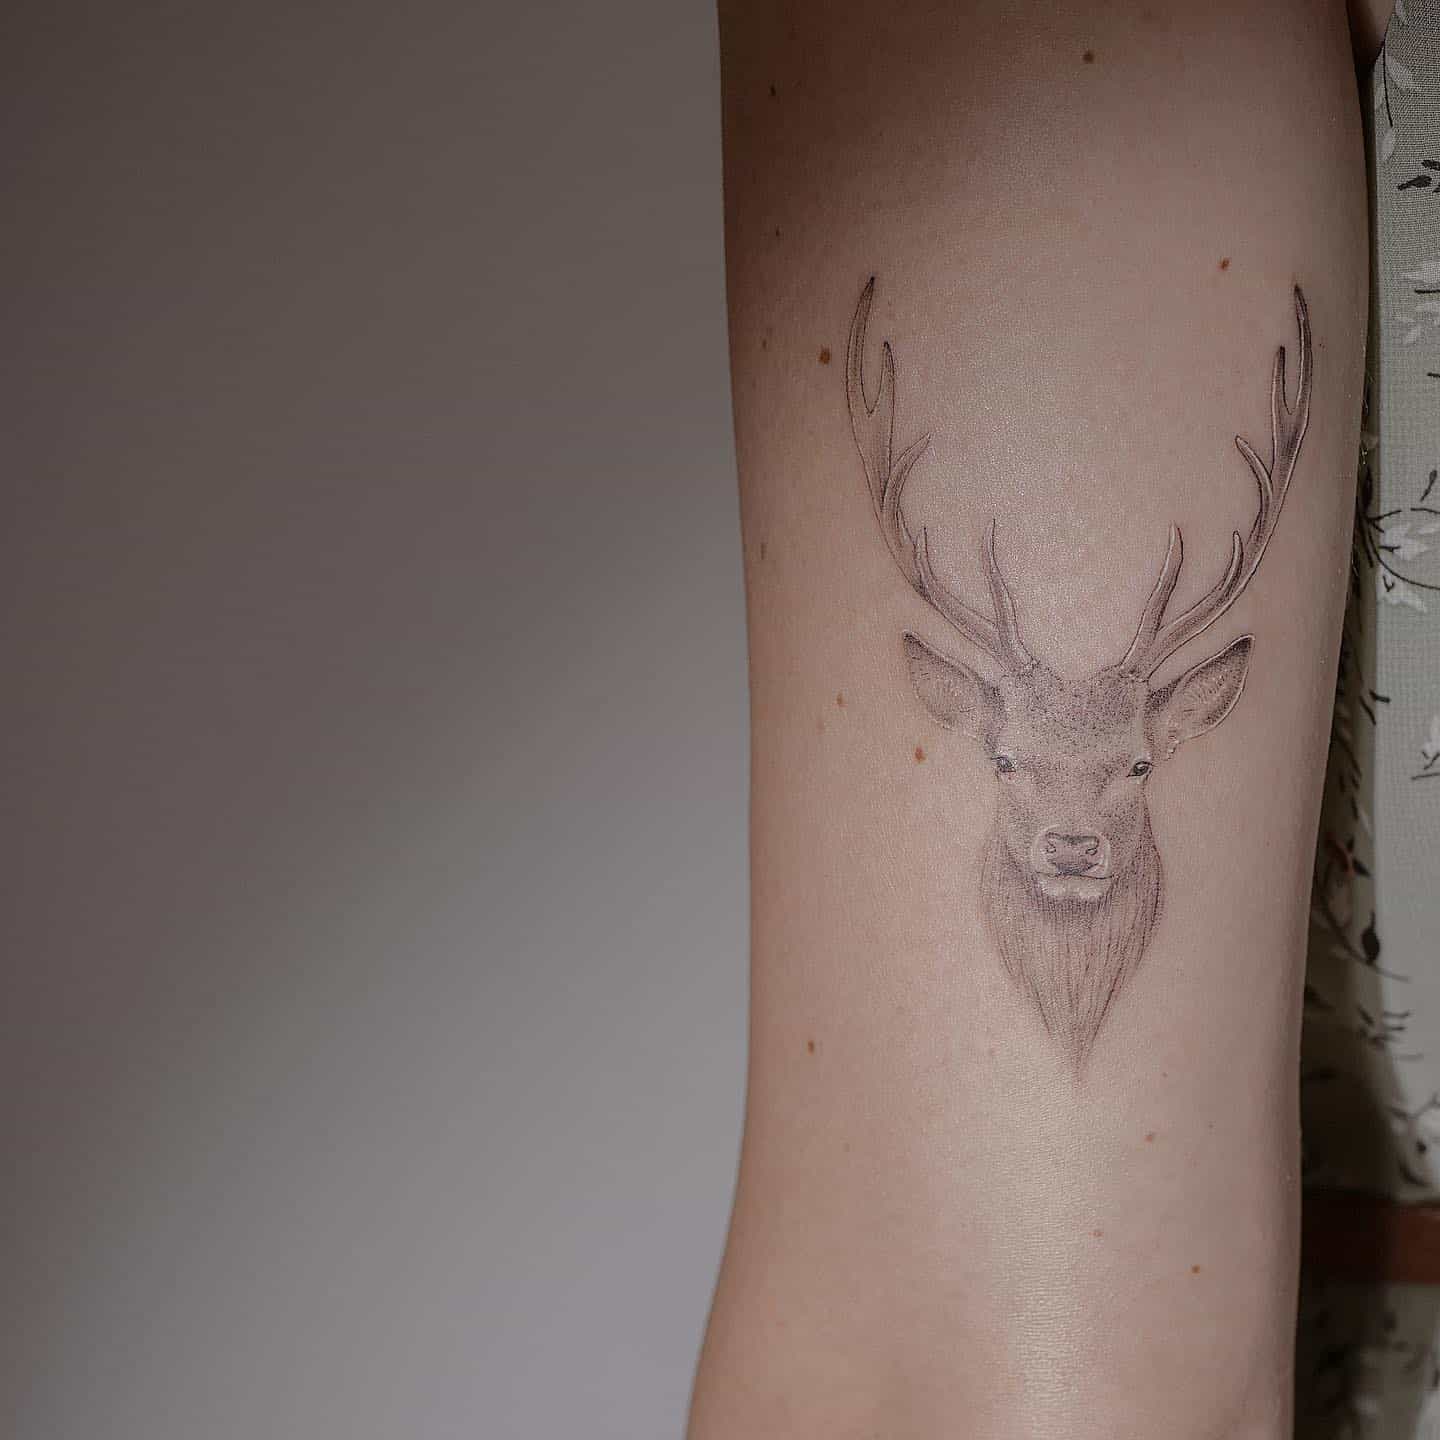 my new forearm piece, she's so cute! #deer #tattoo #watercolor #animals  #woodland #cute | 문신, 사슴, 동물